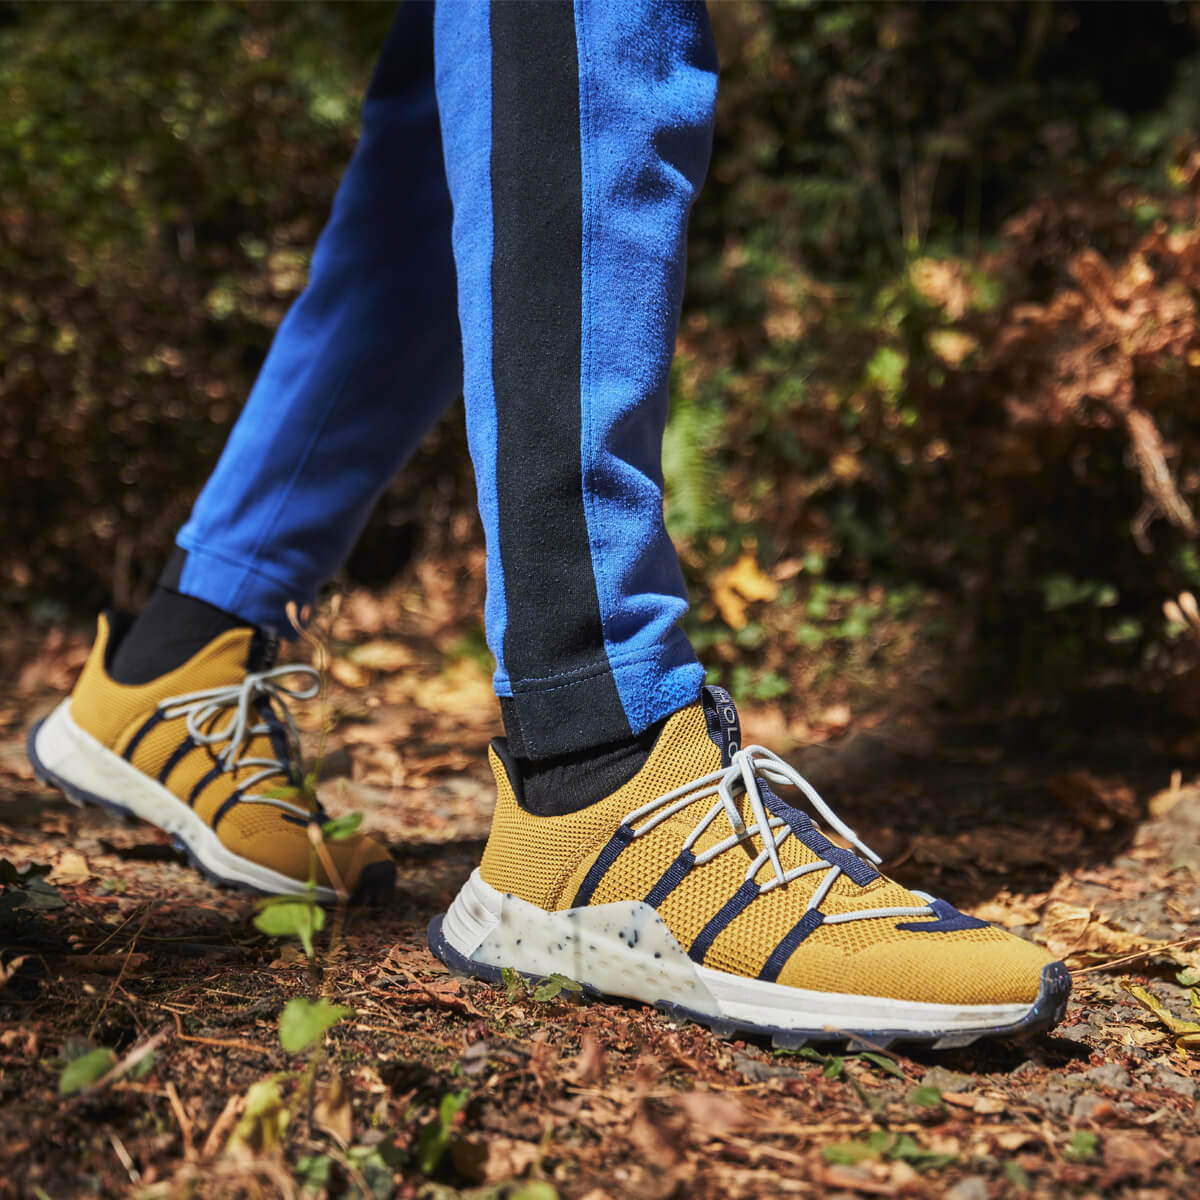 man walking on trail in blue sweatpants and yellow sneakers